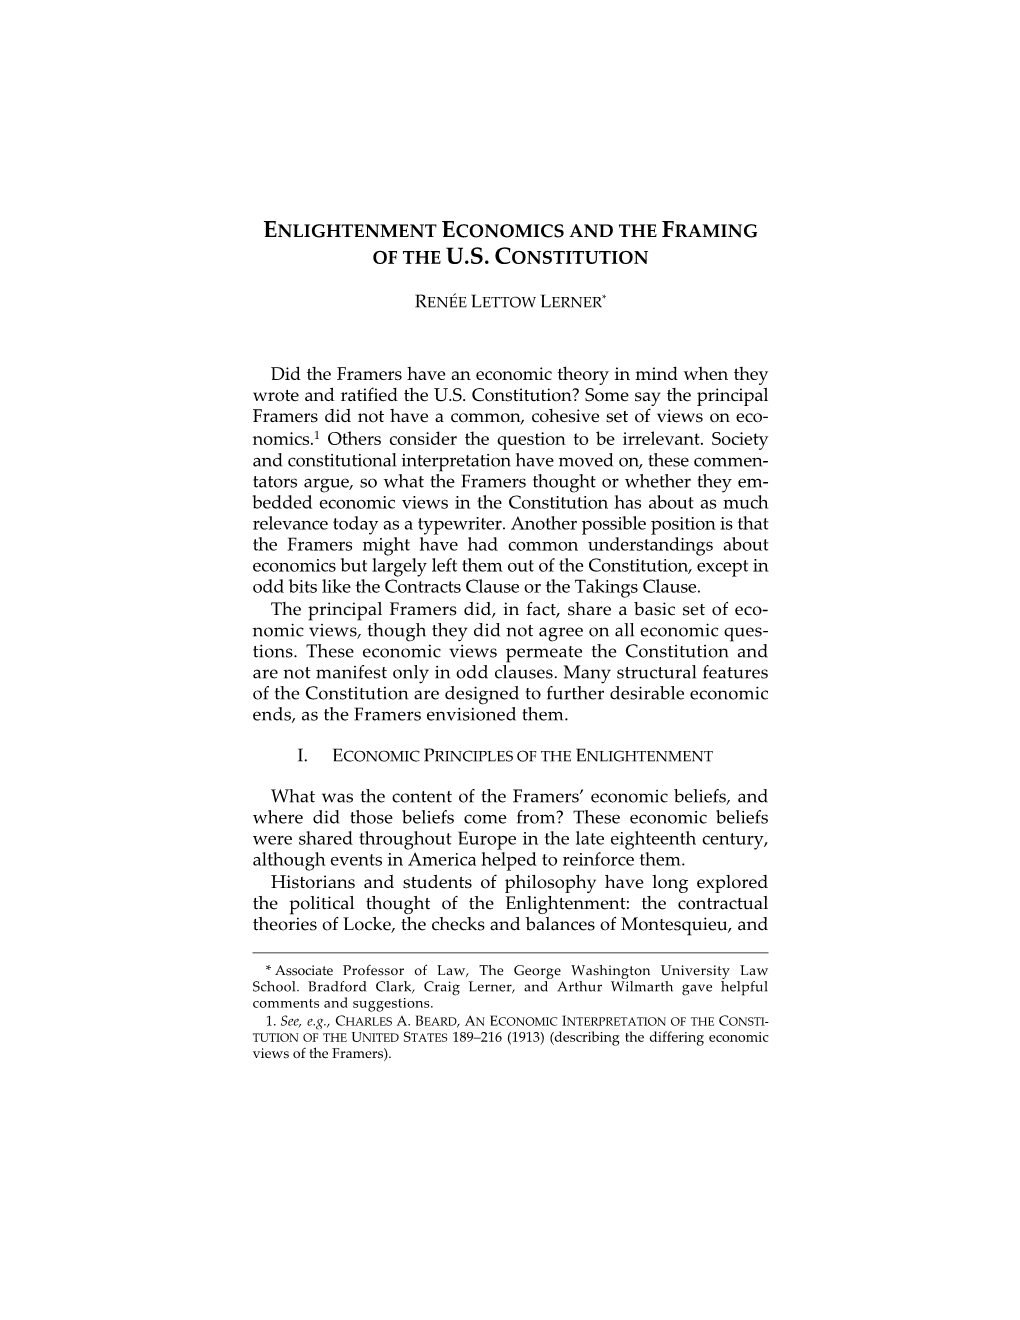 Enlightenment Economics and the Framing of the U.S. Constitution